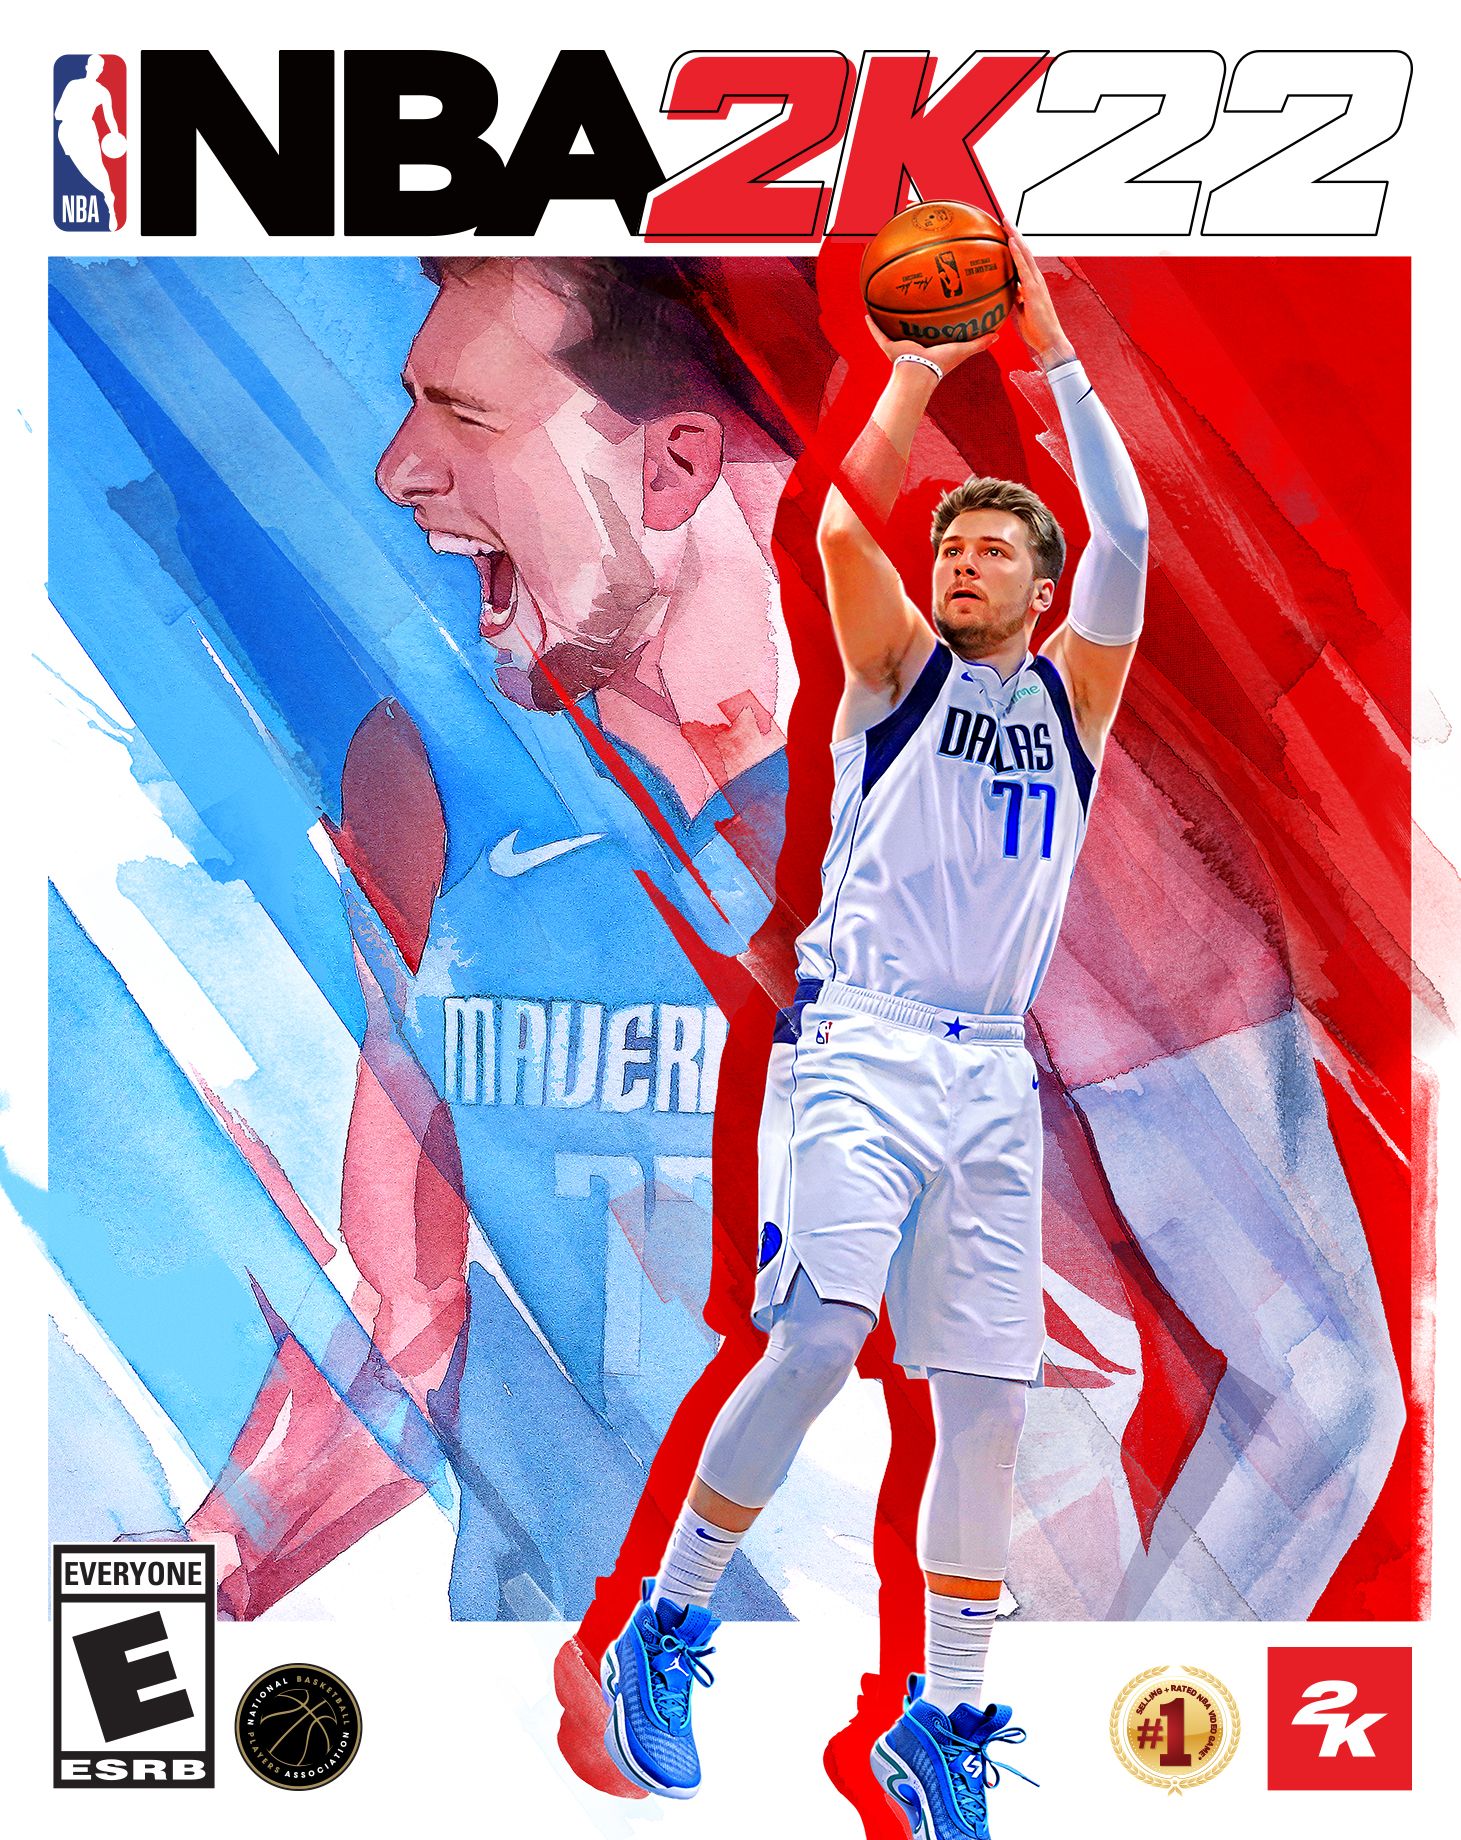 Luka Doncic is on the cover of NBA 2K22